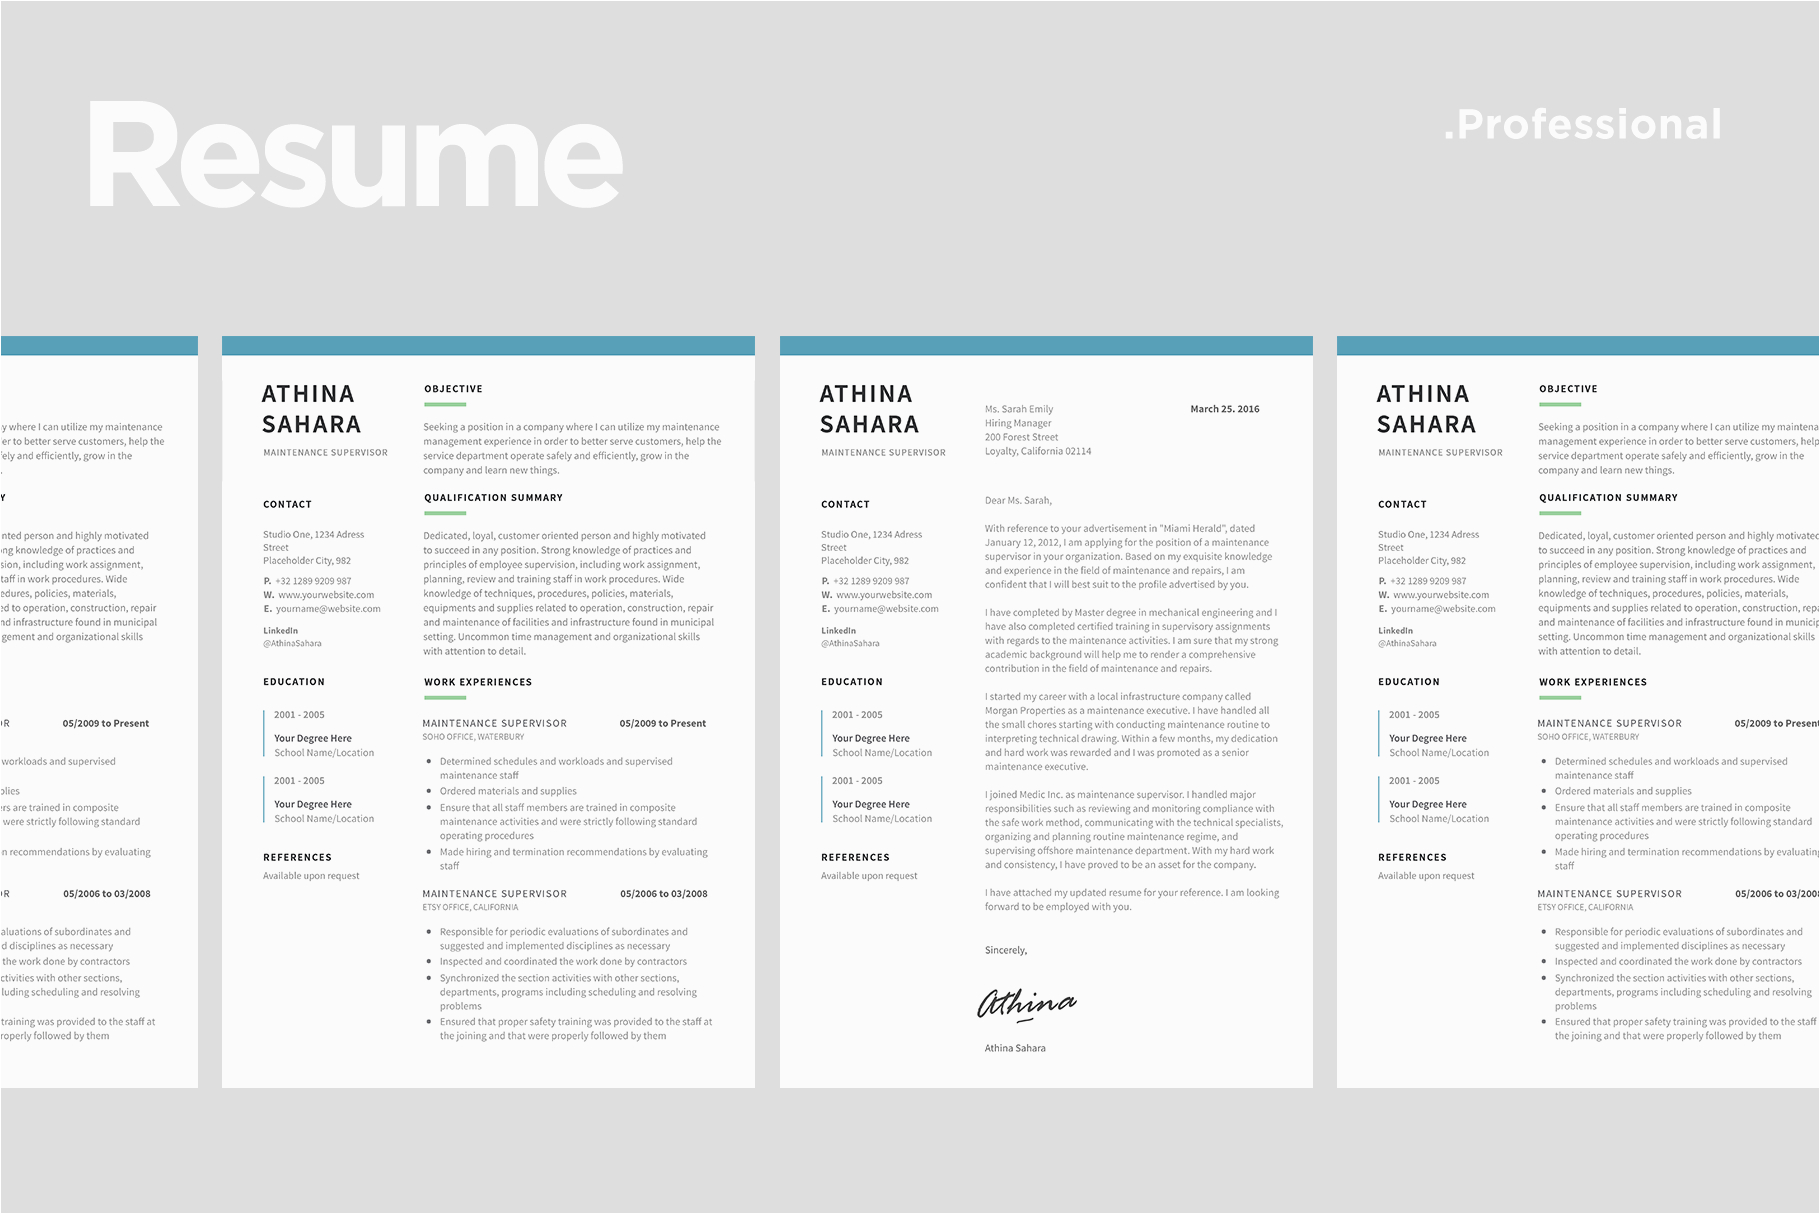 Resume and Matching Cover Letter Templates Resume Template Match with Cover Letter by Ariodsgn